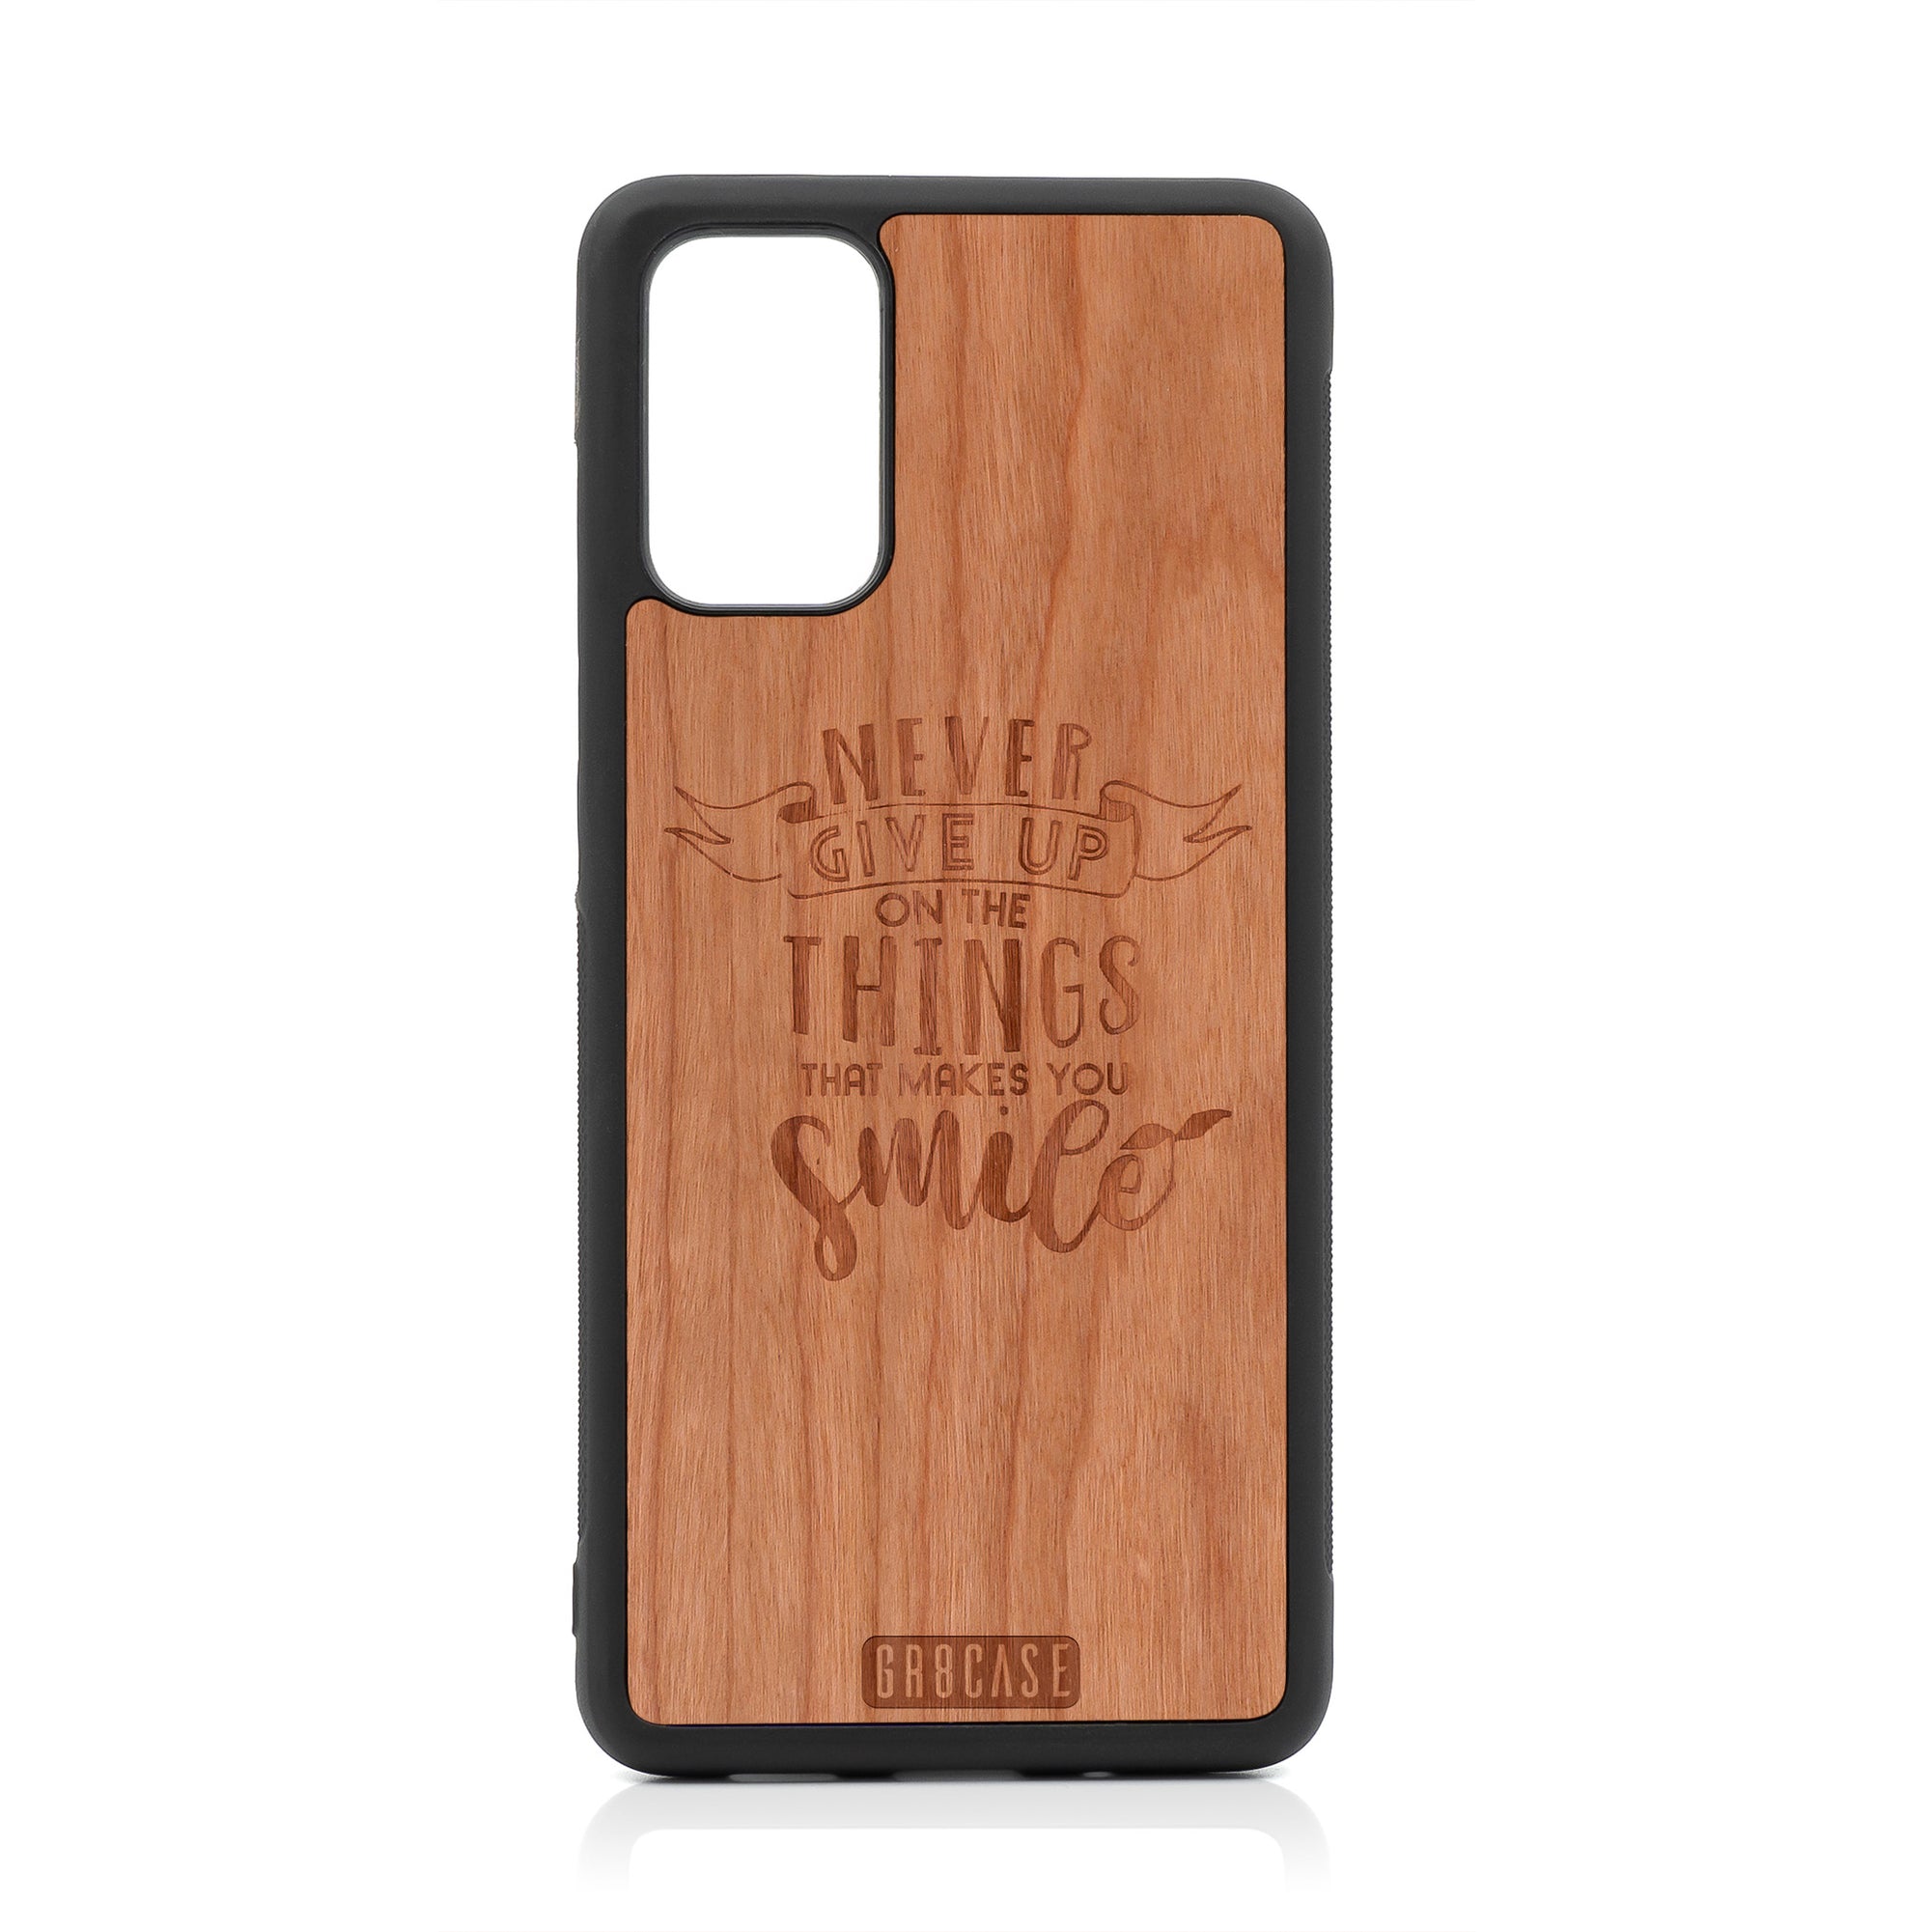 Never Give Up On The Things That Makes You Smile Design Wood Case For Samsung Galaxy S20 Plus by GR8CASE